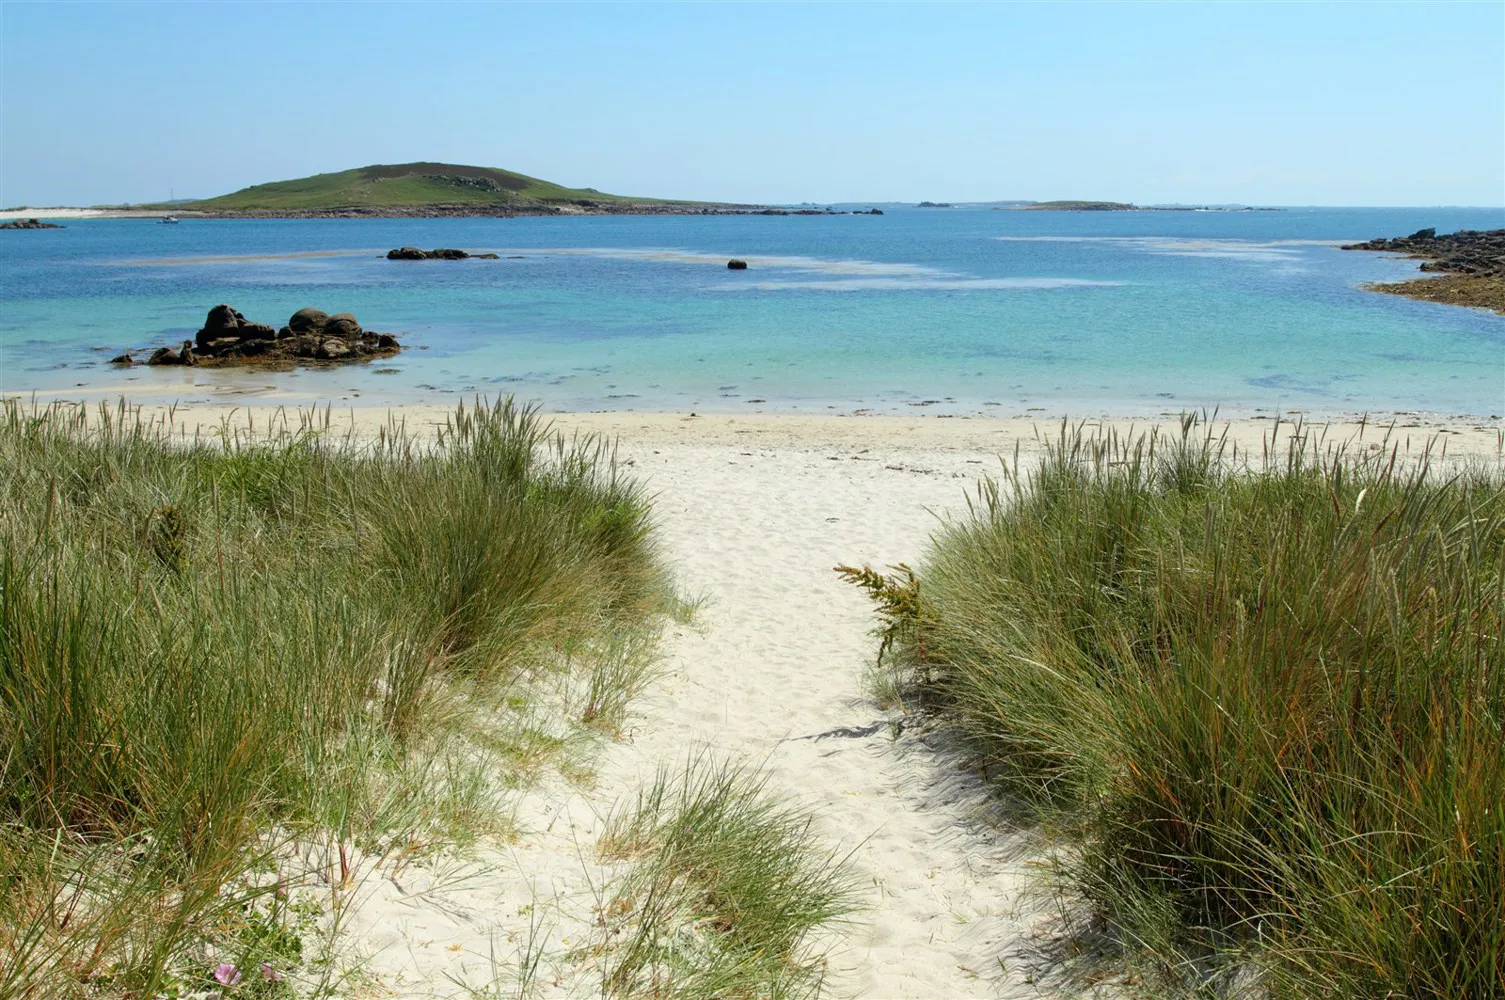 Rushy Bay, Bryher, Isles of Scilly